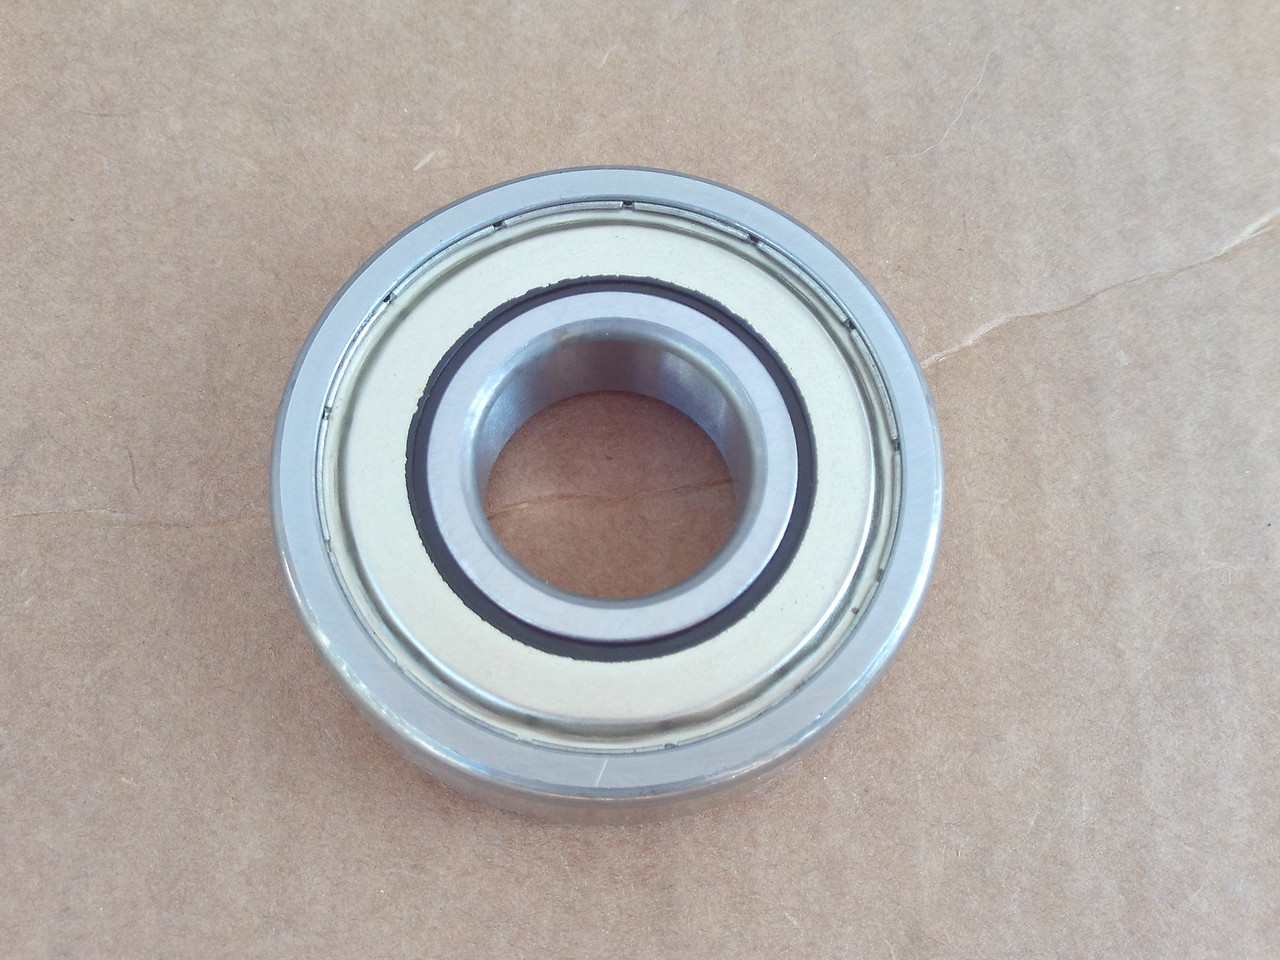 Spindle Bearing for Scag Freedom Z 4810101, 4810102, 483303, 48101-01, 48101-02 ID: 0.984"= 1" OD: 2.44"= 2-3/8" Height: 0.669= 5/8"